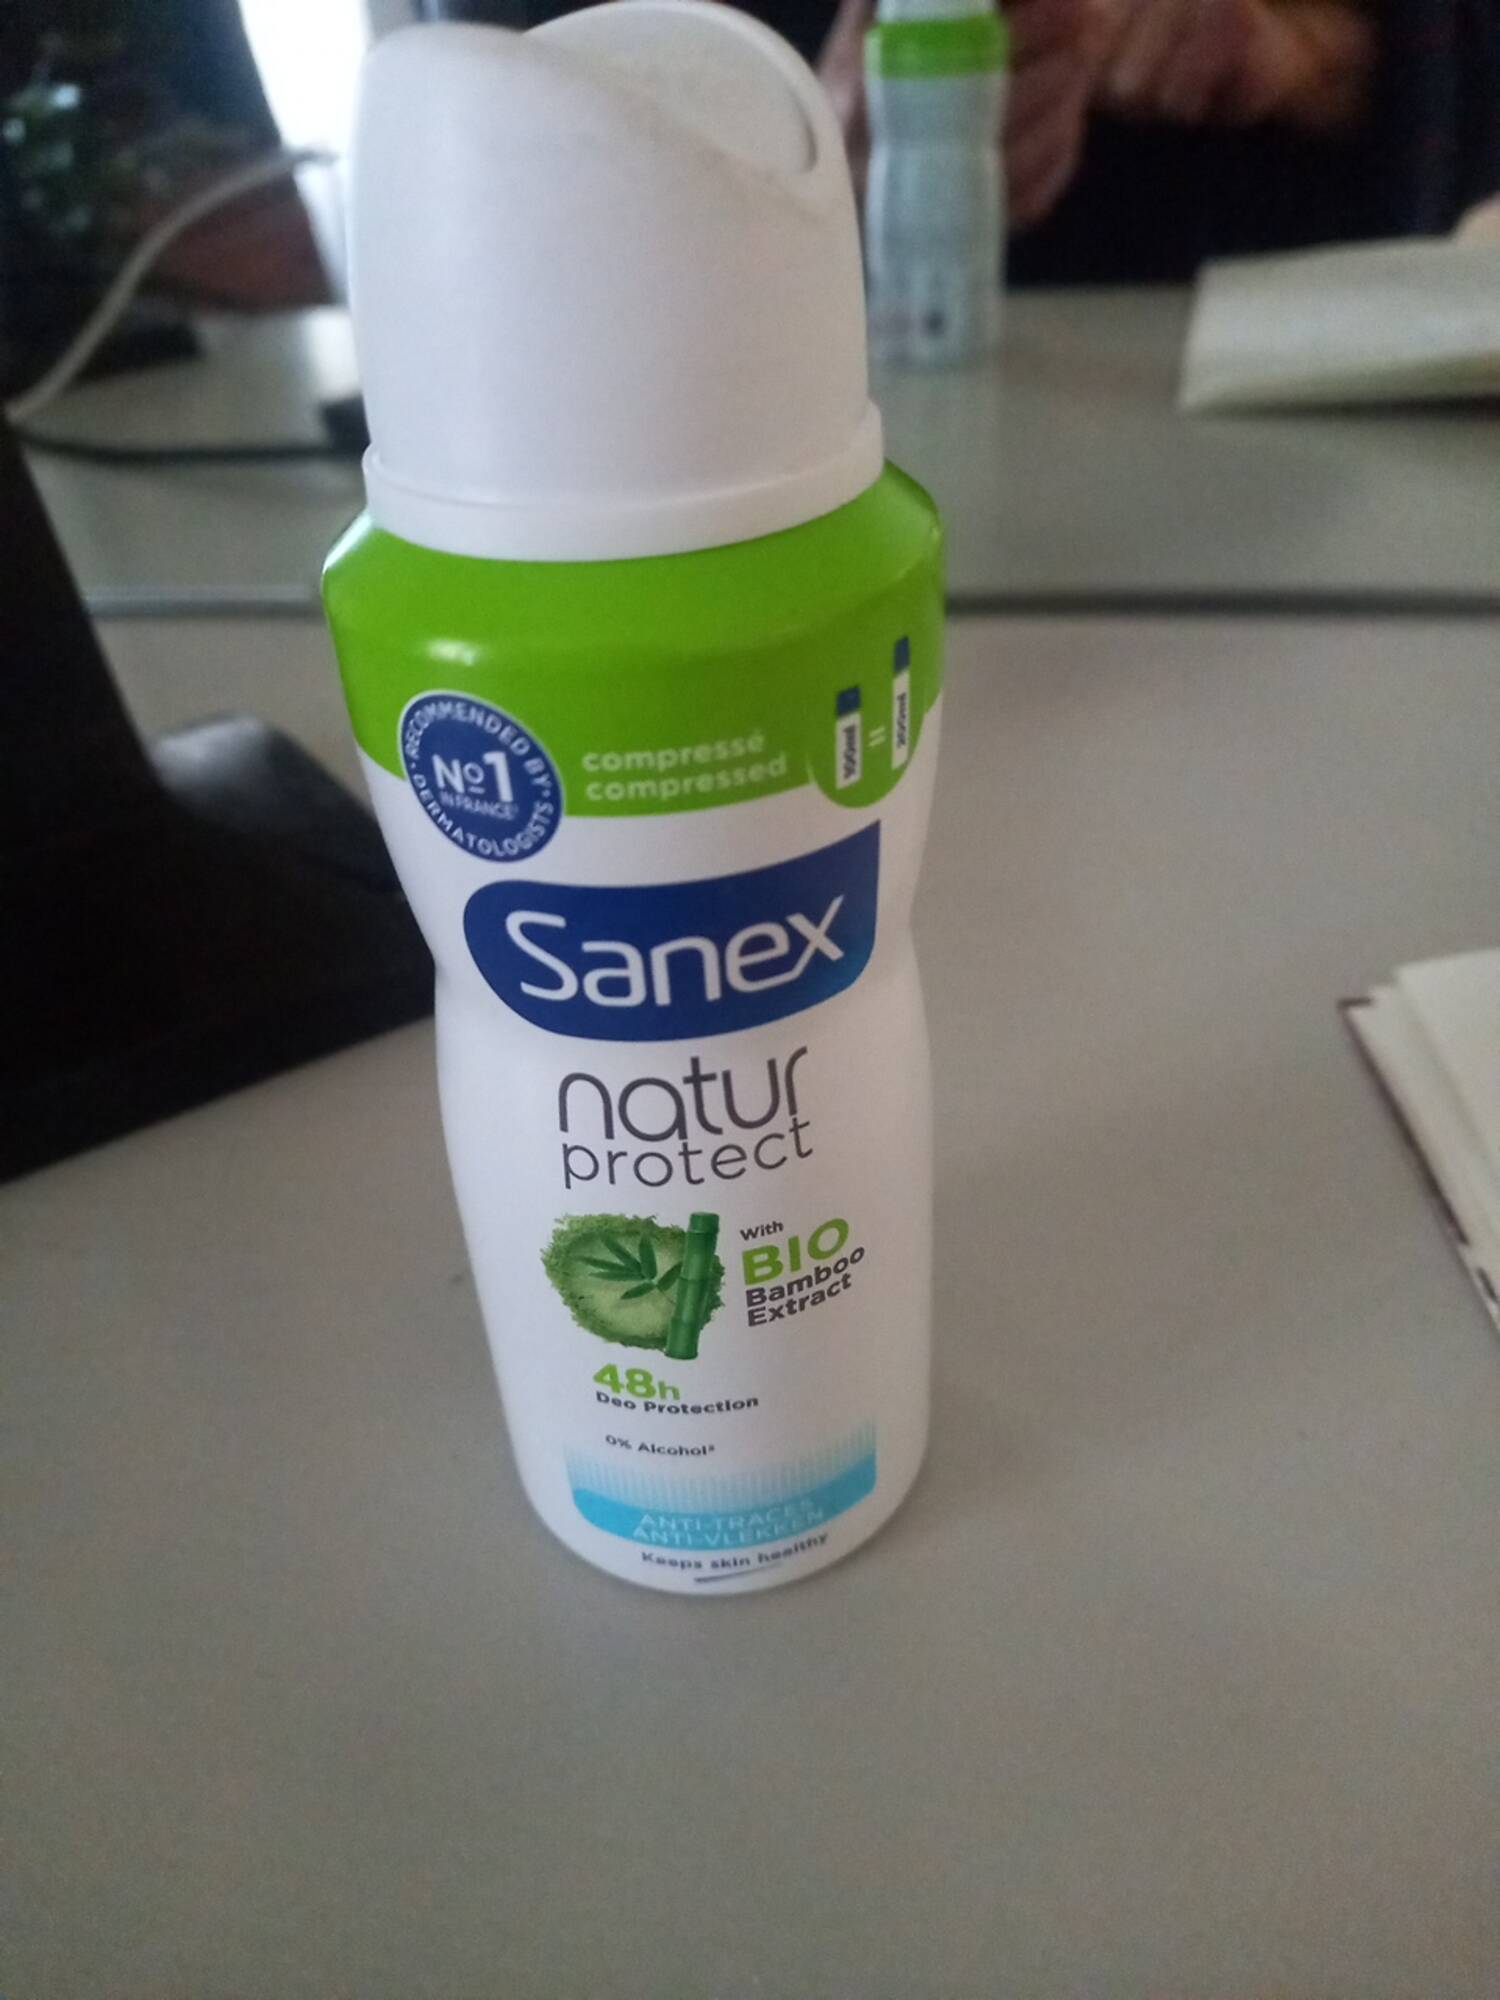 SANEX - Natur protect with bio bamboo extract  - Déo protection 48h